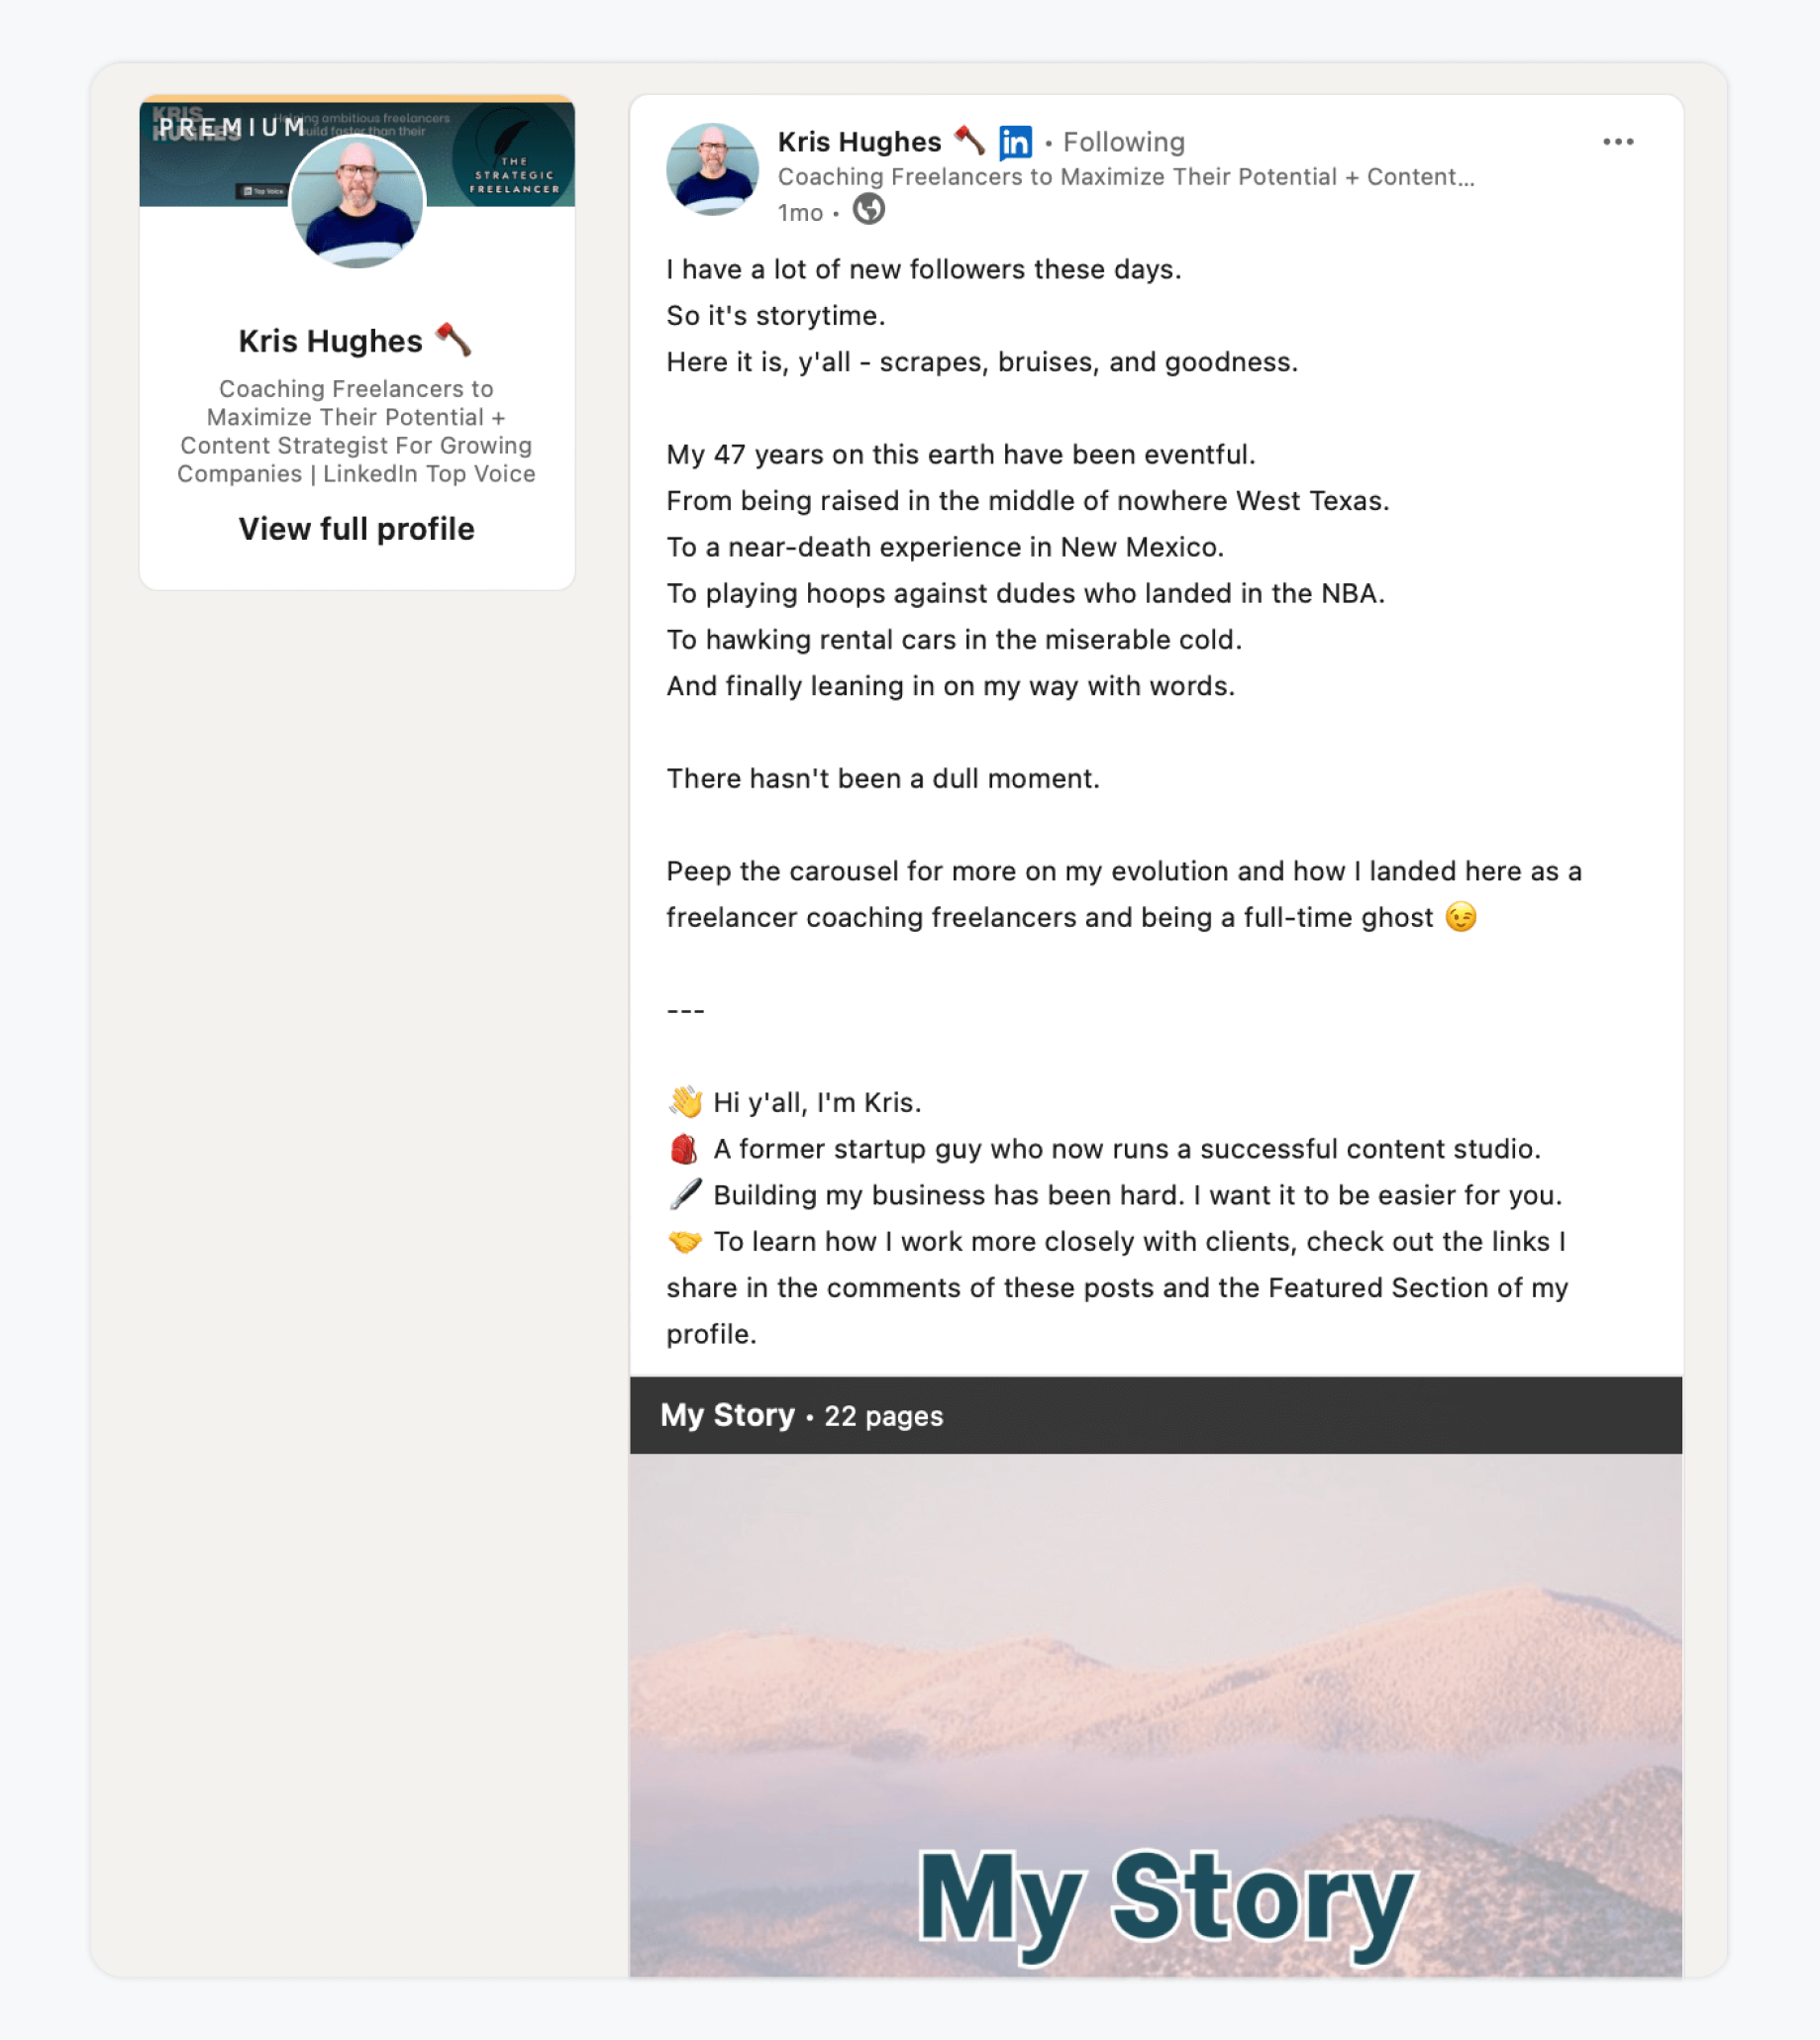 An image shows an agency owner sharing their personal story on LinkedIn